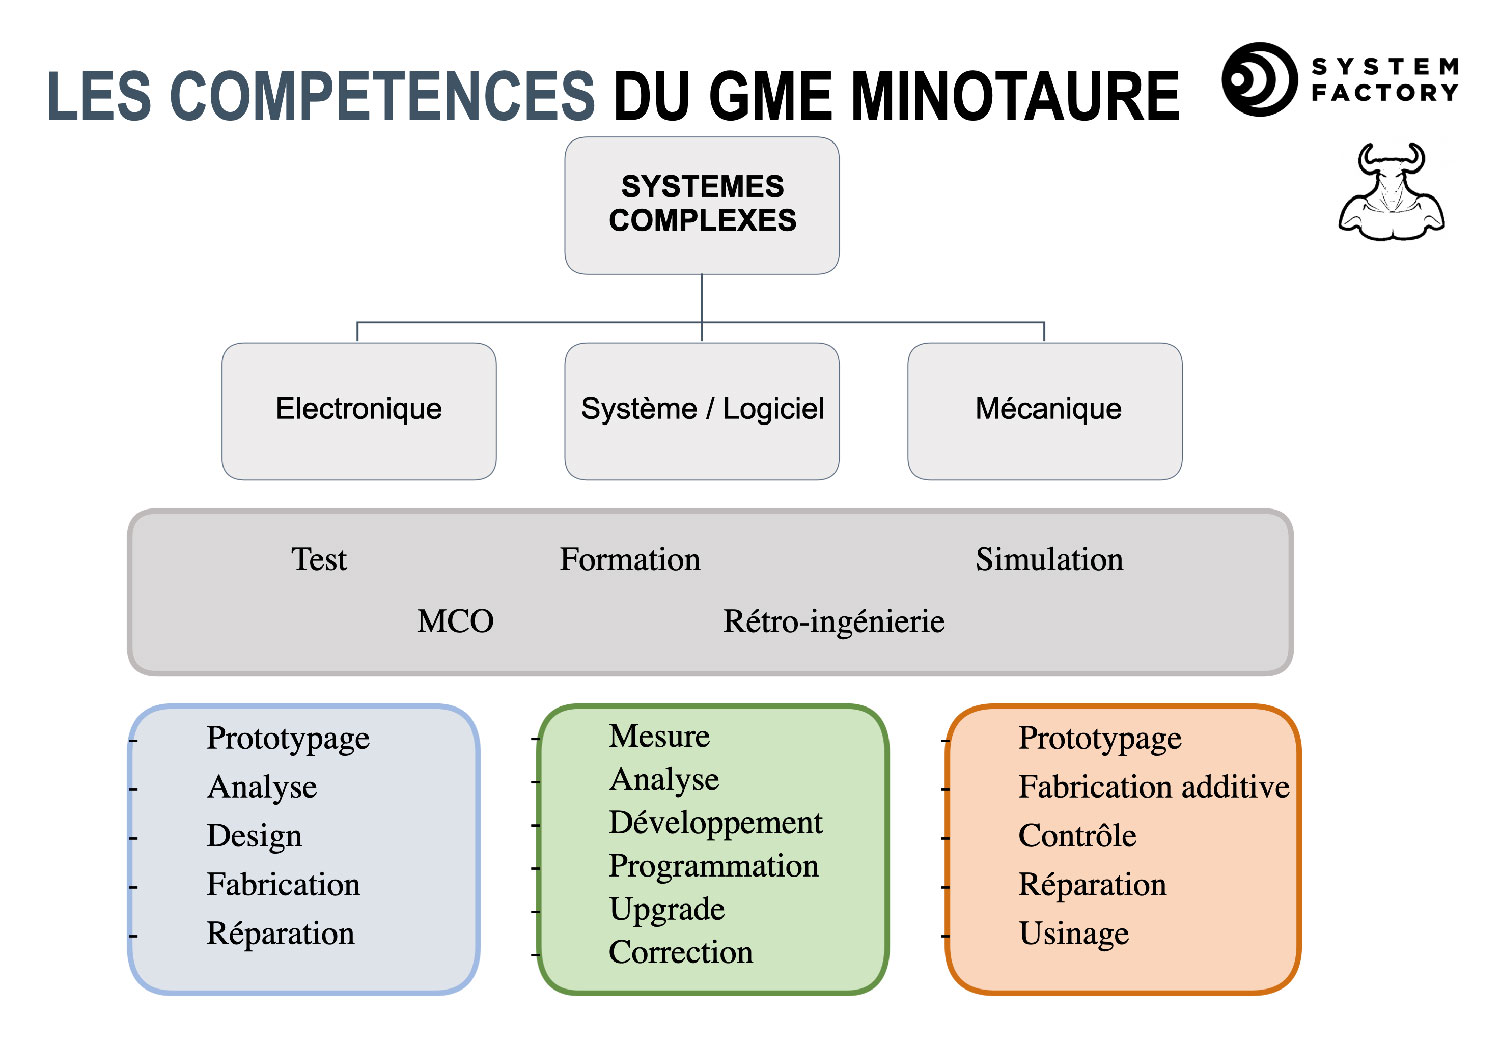 GME-Minotaure-System-factory-cluster-TVT-Forum-2MF